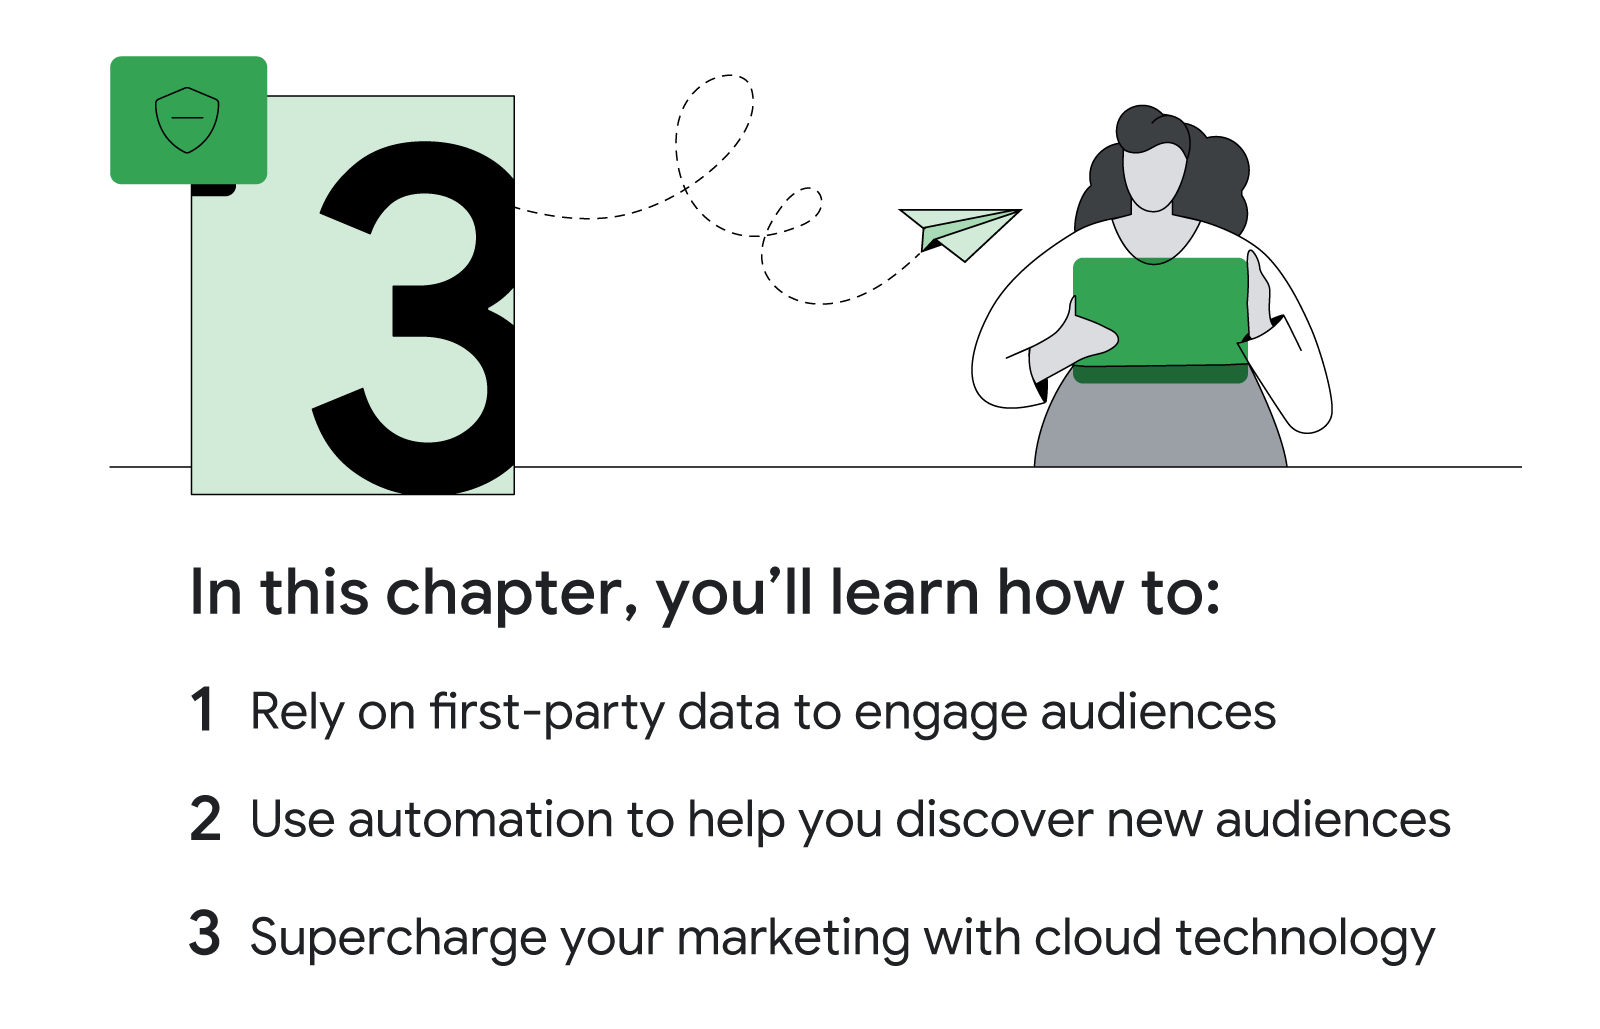 Chapter 3. A Latina reads from her laptop as a paper airplane whizzes by. In this chapter you’ll learn how to rely on first-party data to engage audiences, use automation to help discover new audiences, and supercharge your marketing with cloud tech